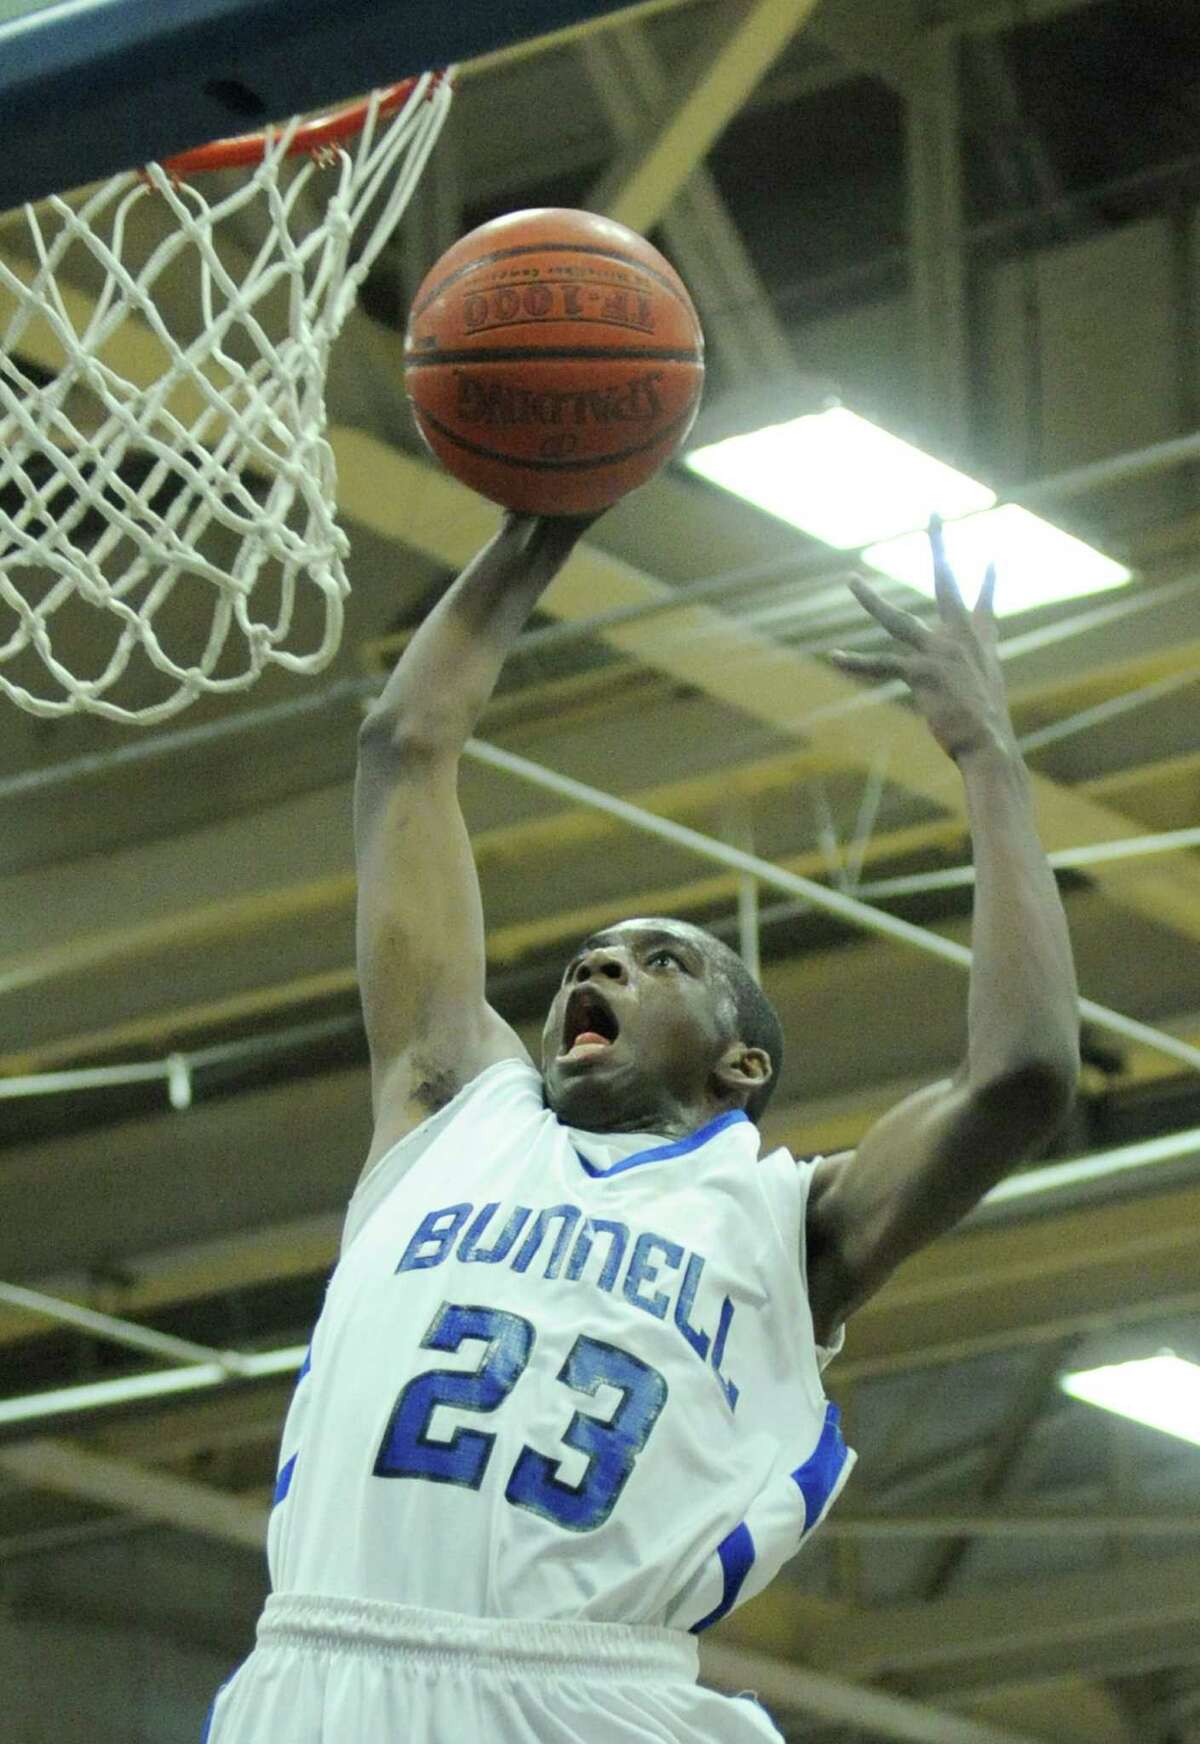 Bunnell's Issac Vann slam dunks during Bunnell's 71-61 win in the SWC Boys Basketball Championship game at Bunnell High School in Stratford, Conn. Thursday, Feb. 28, 2013.